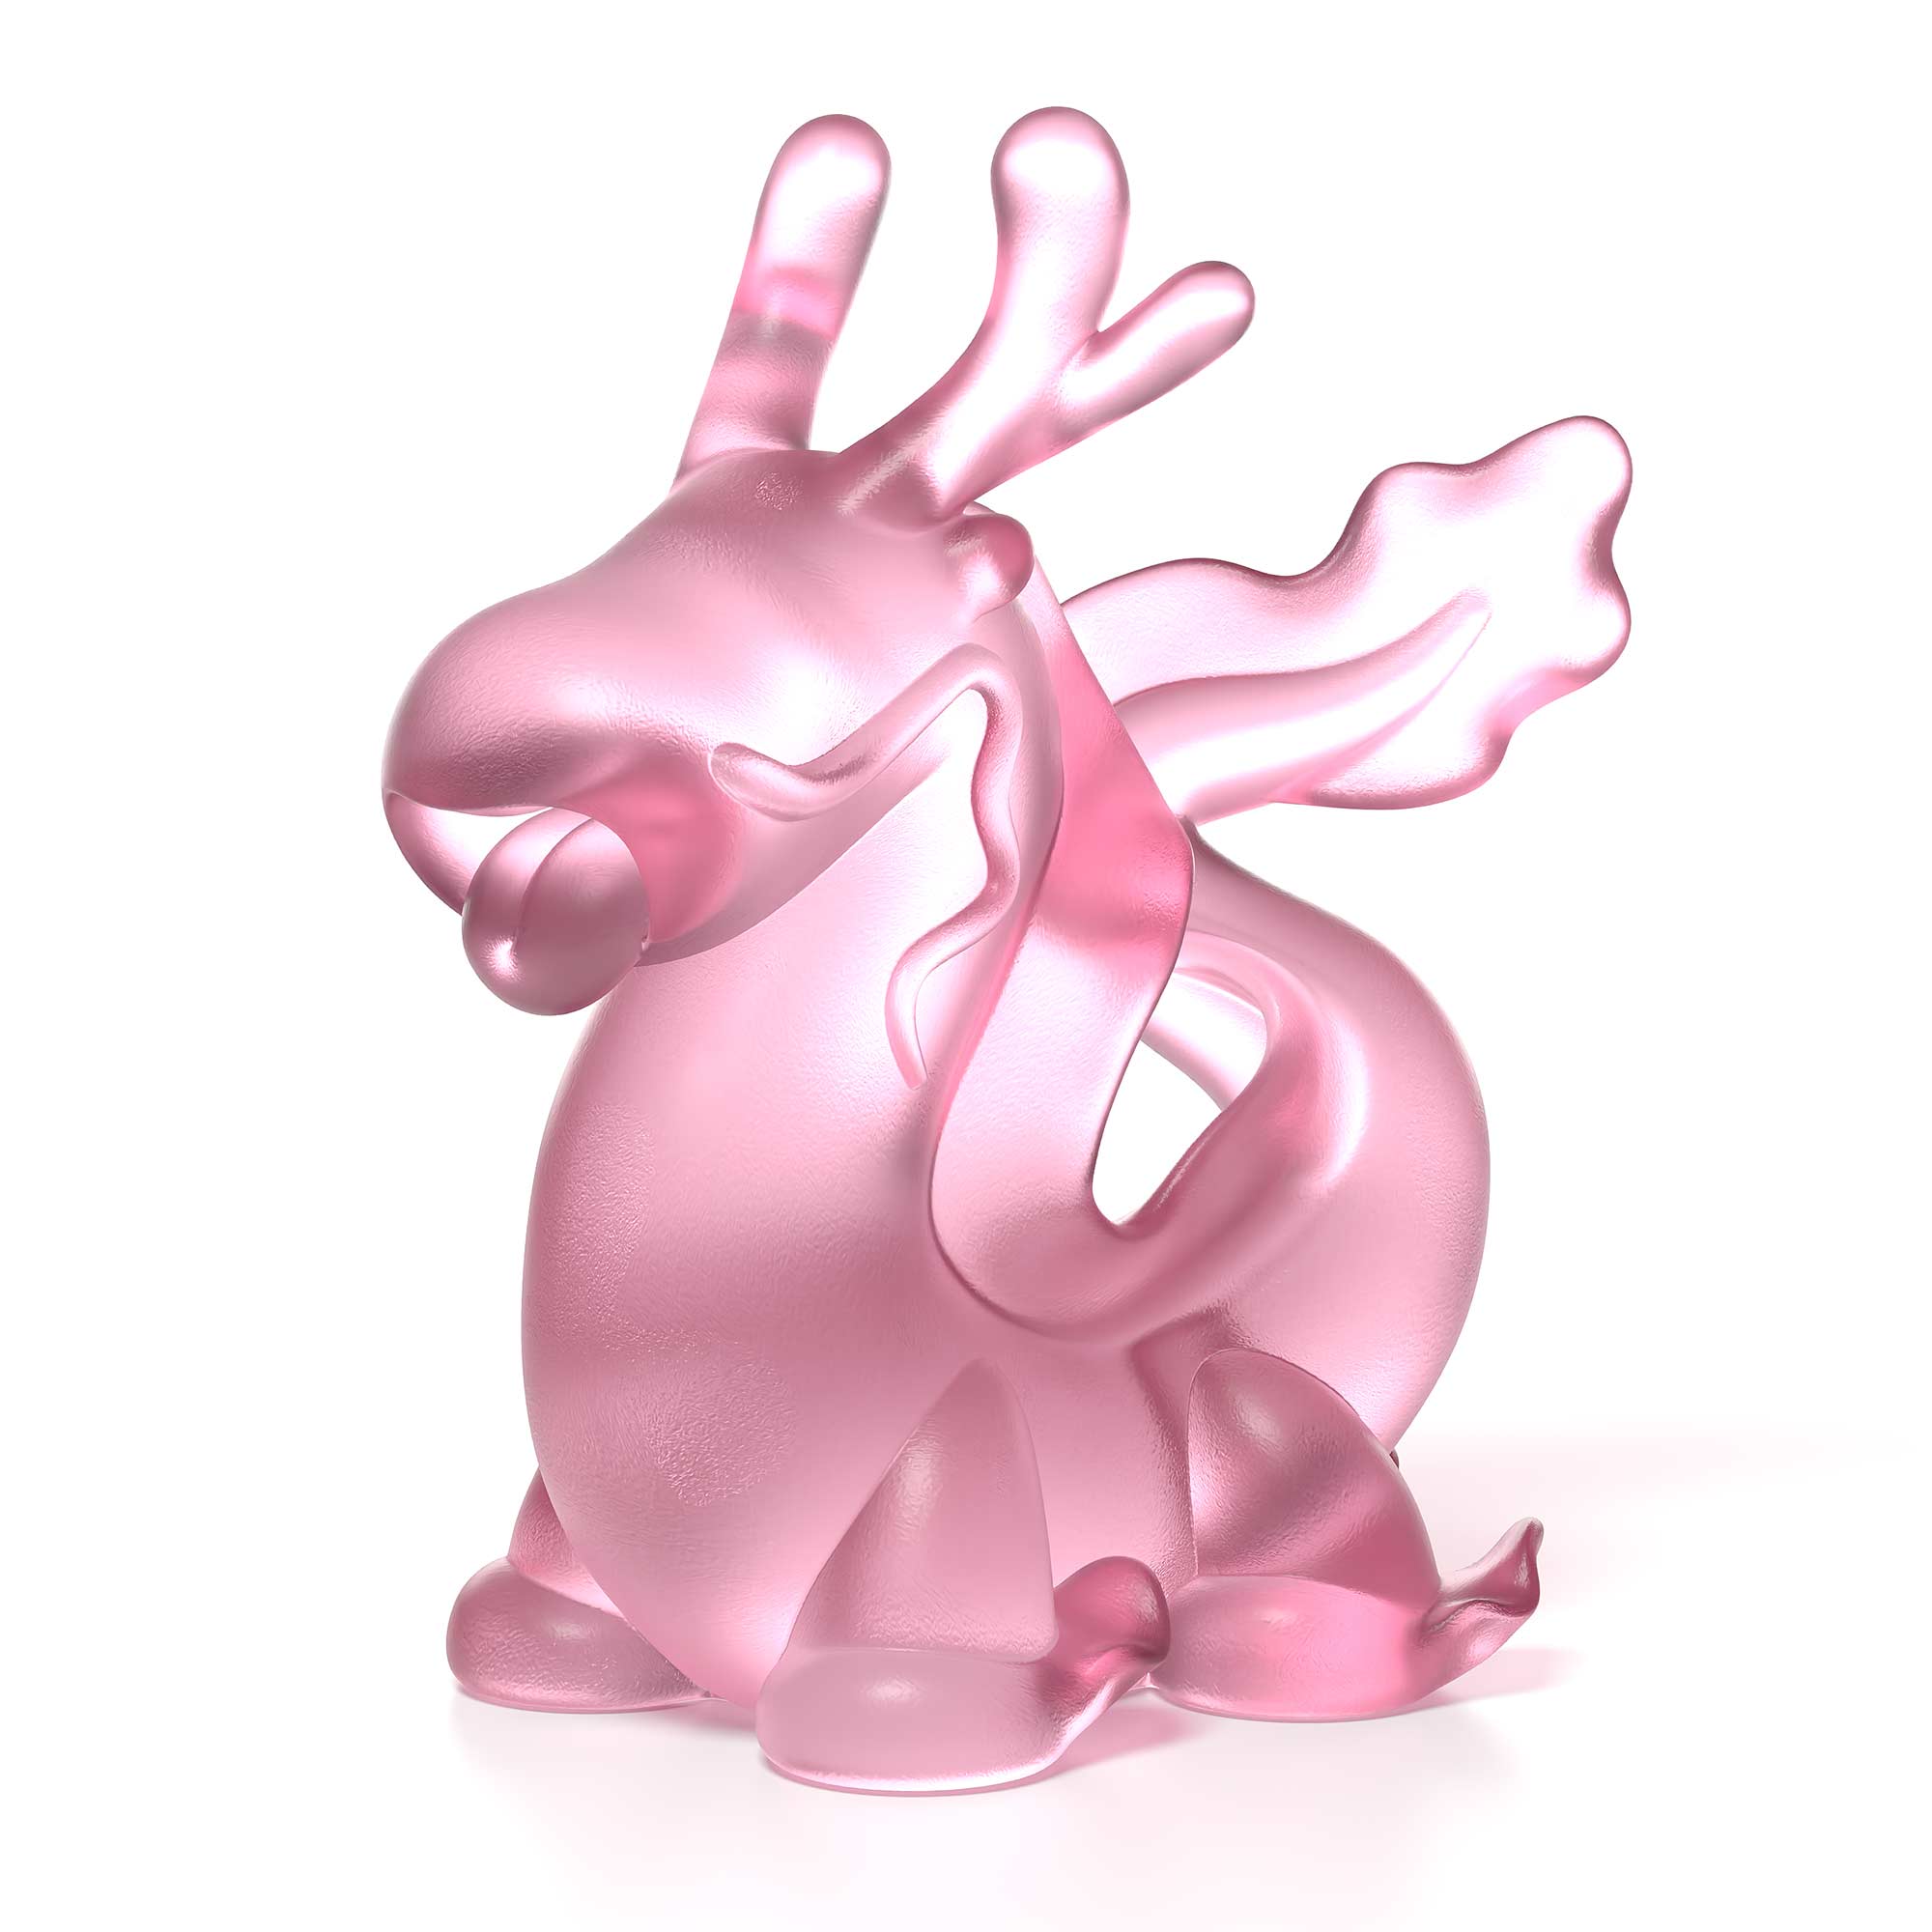 Dragon's Breath pink crystal sculpture the size is  16 cm height, by Ferdi B Dick,  Limited edition of 50 hero view